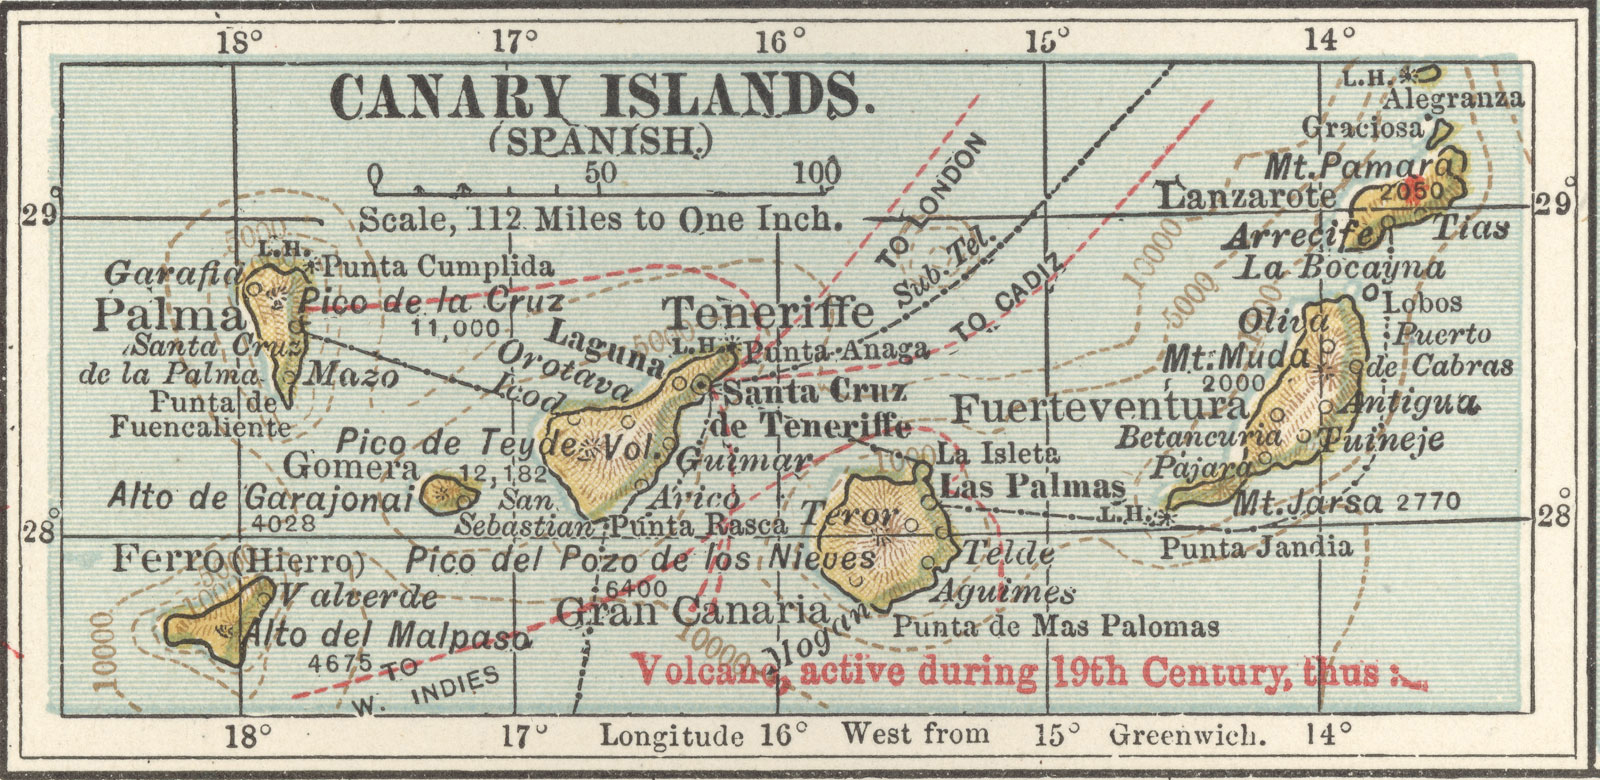 Map of the Canary Islands (Spanish), c. 1900